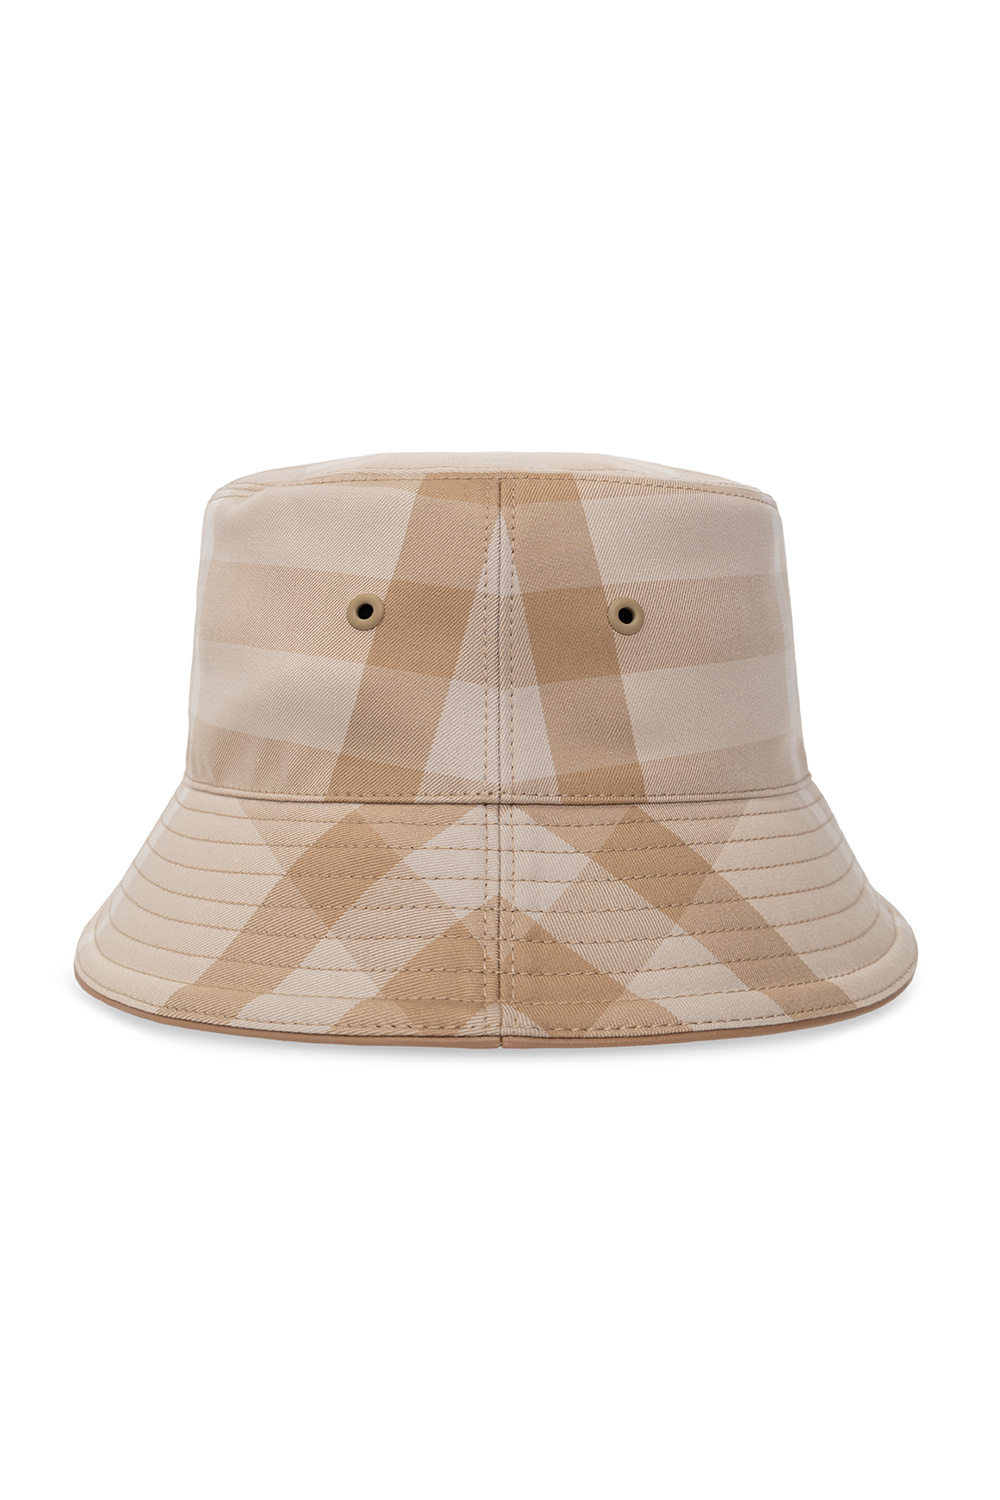 Burberry Softed bucket hat